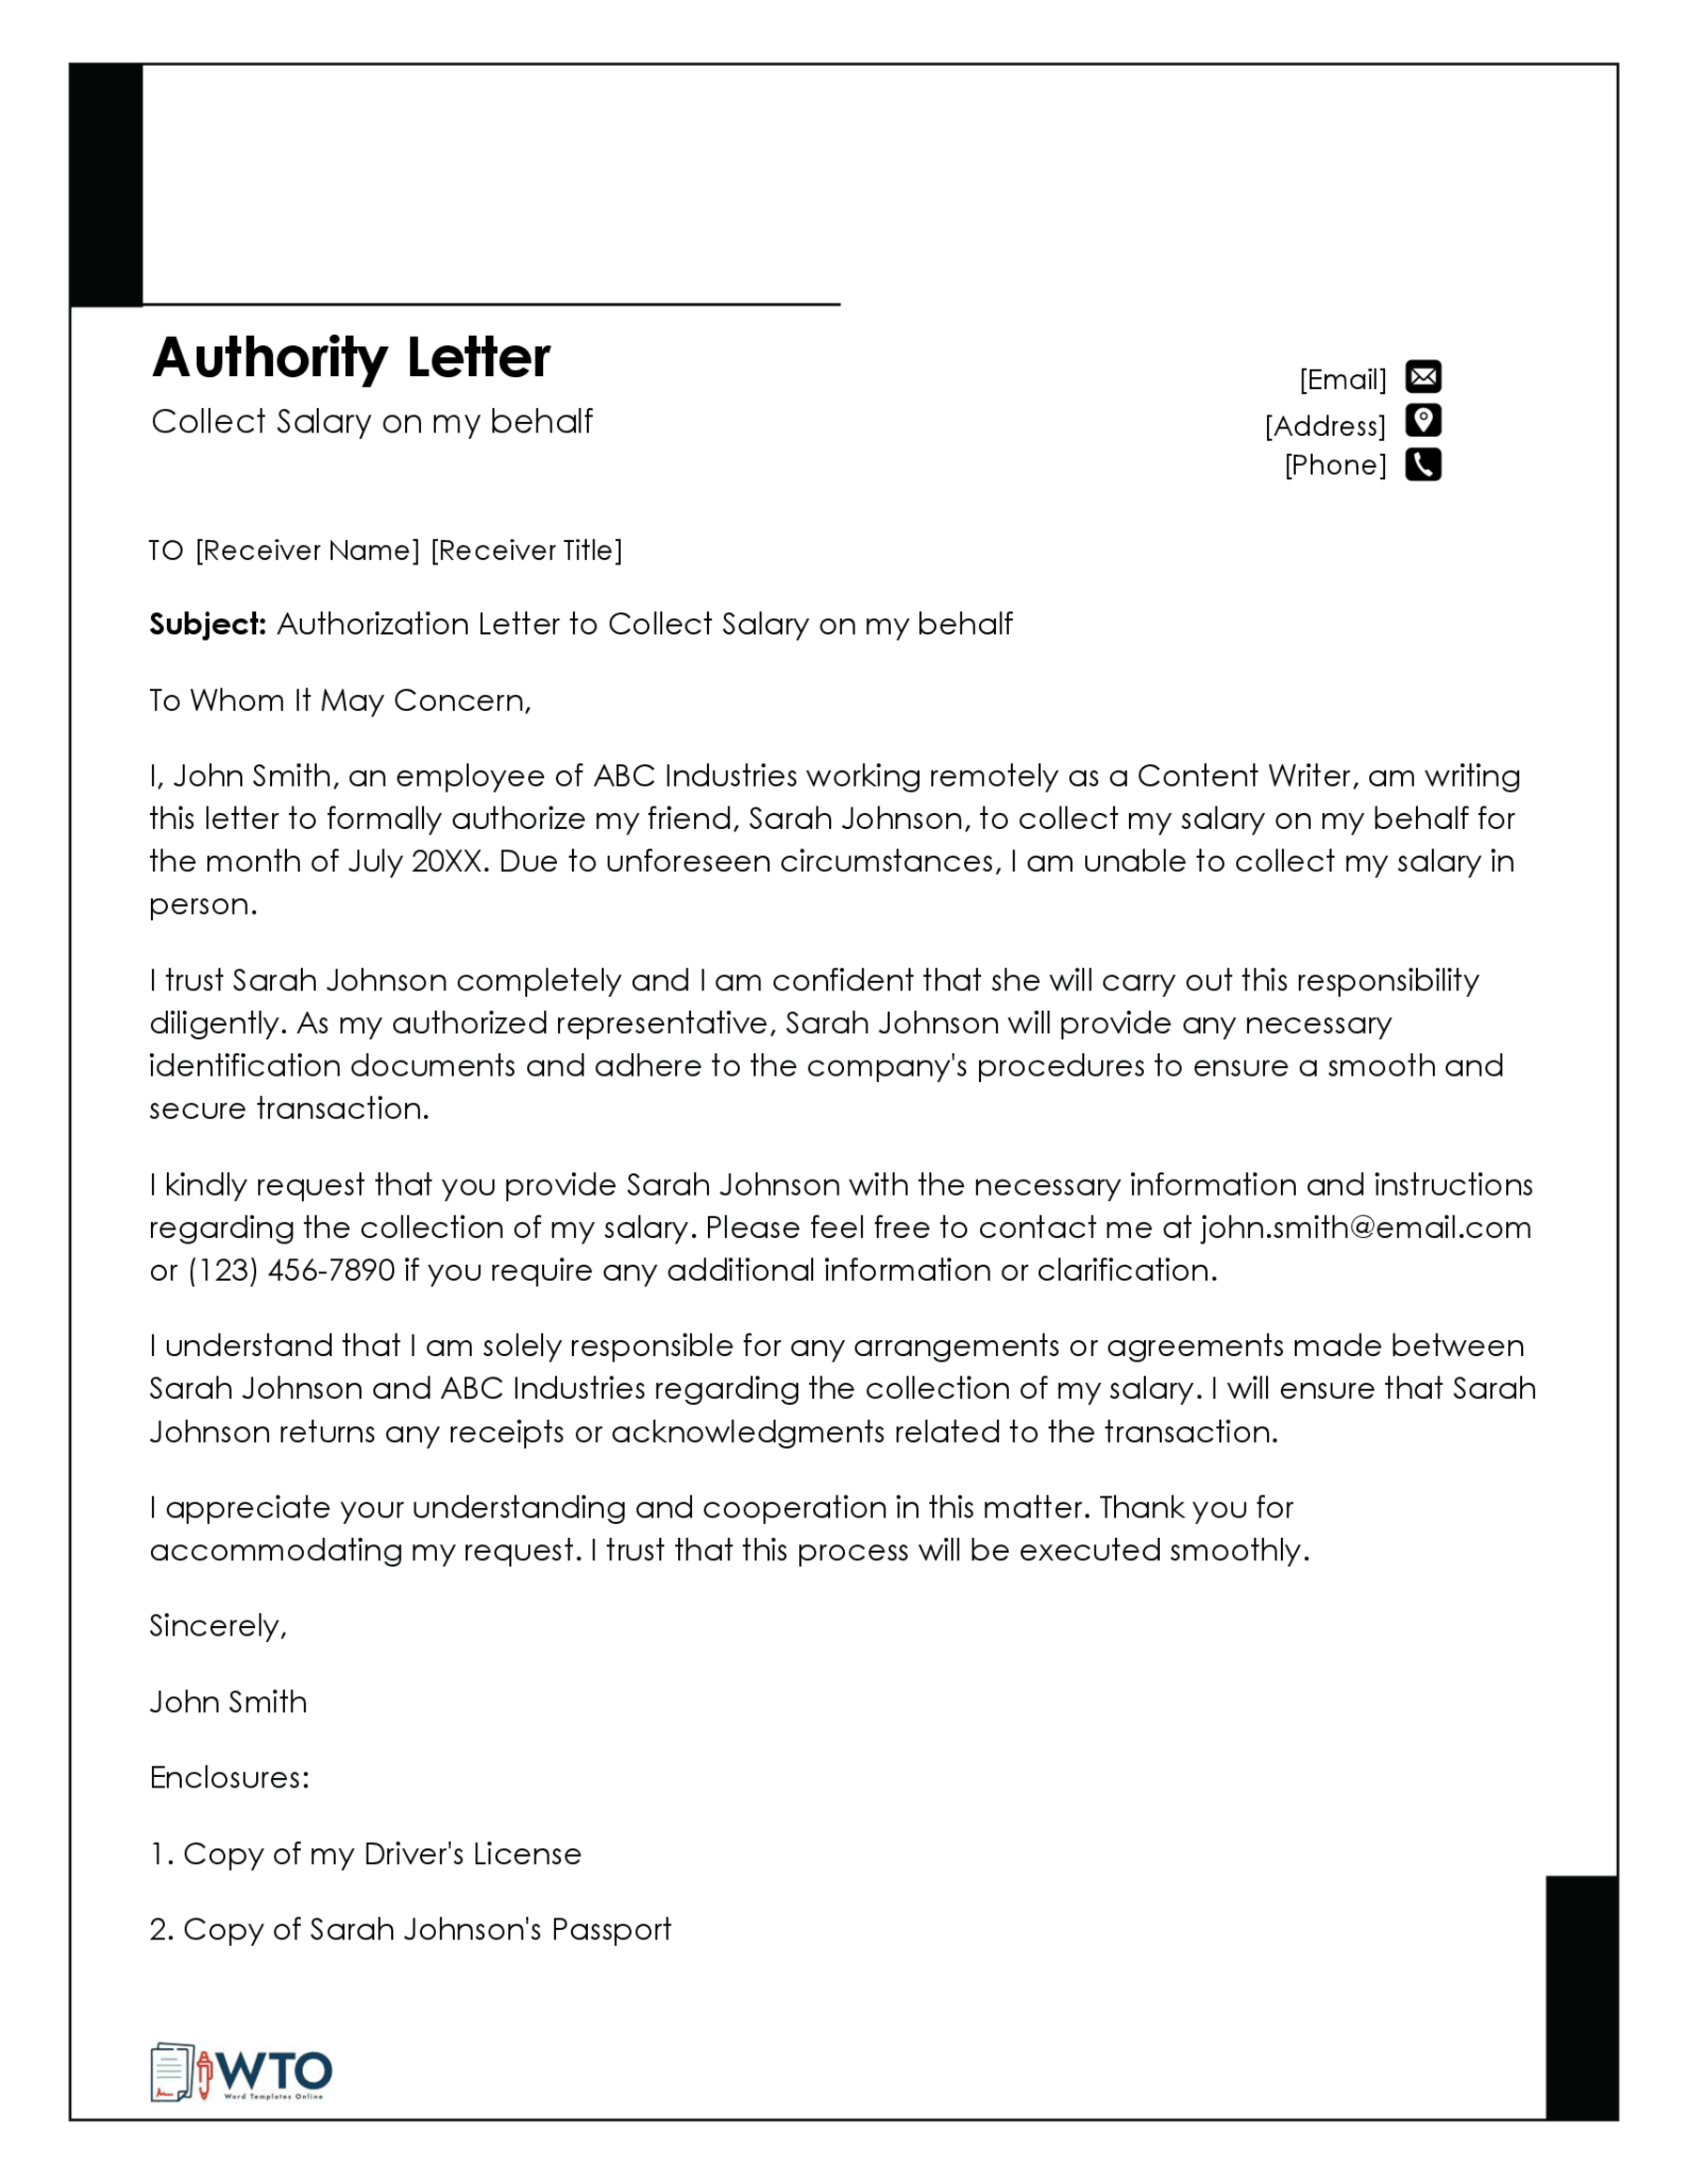 Sample Authorization Letter to Collect Salary-Free Downloadable